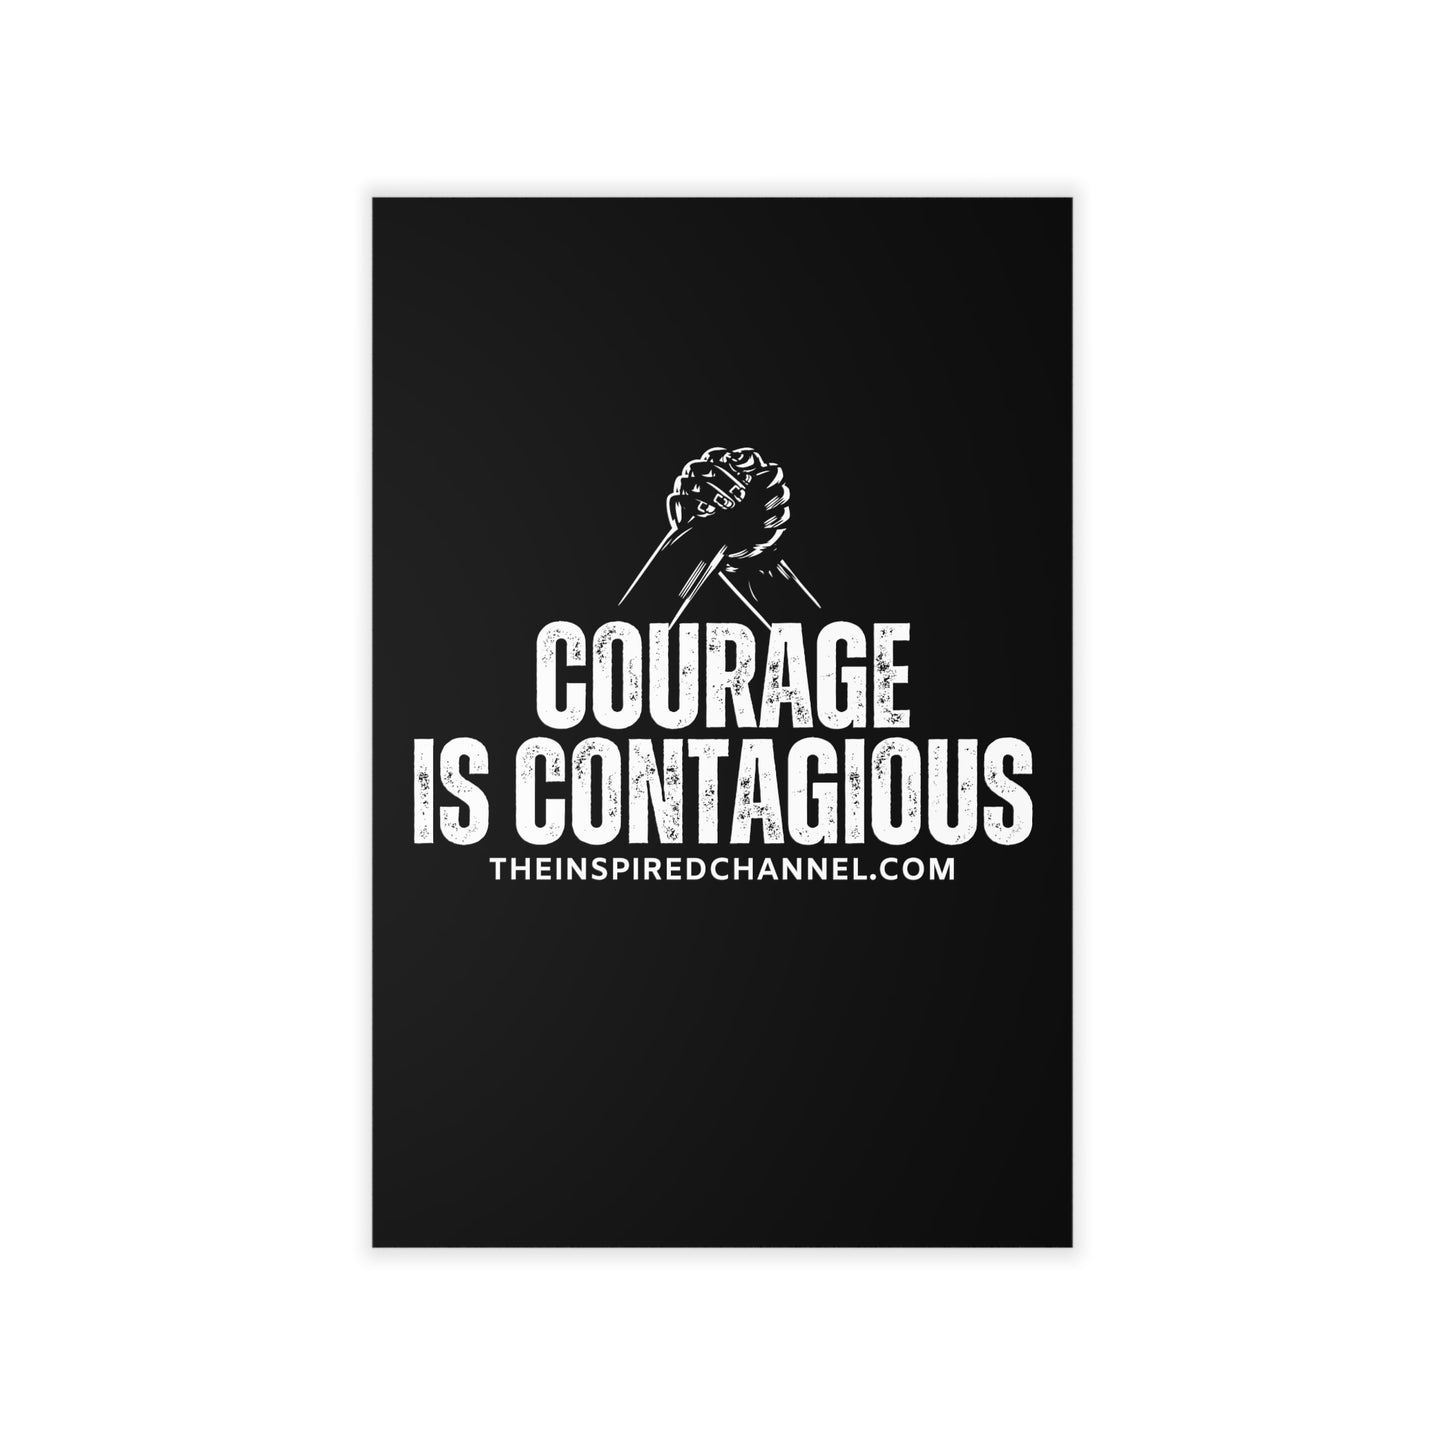 INSPIRED Courage Is Contagious Wall Decals